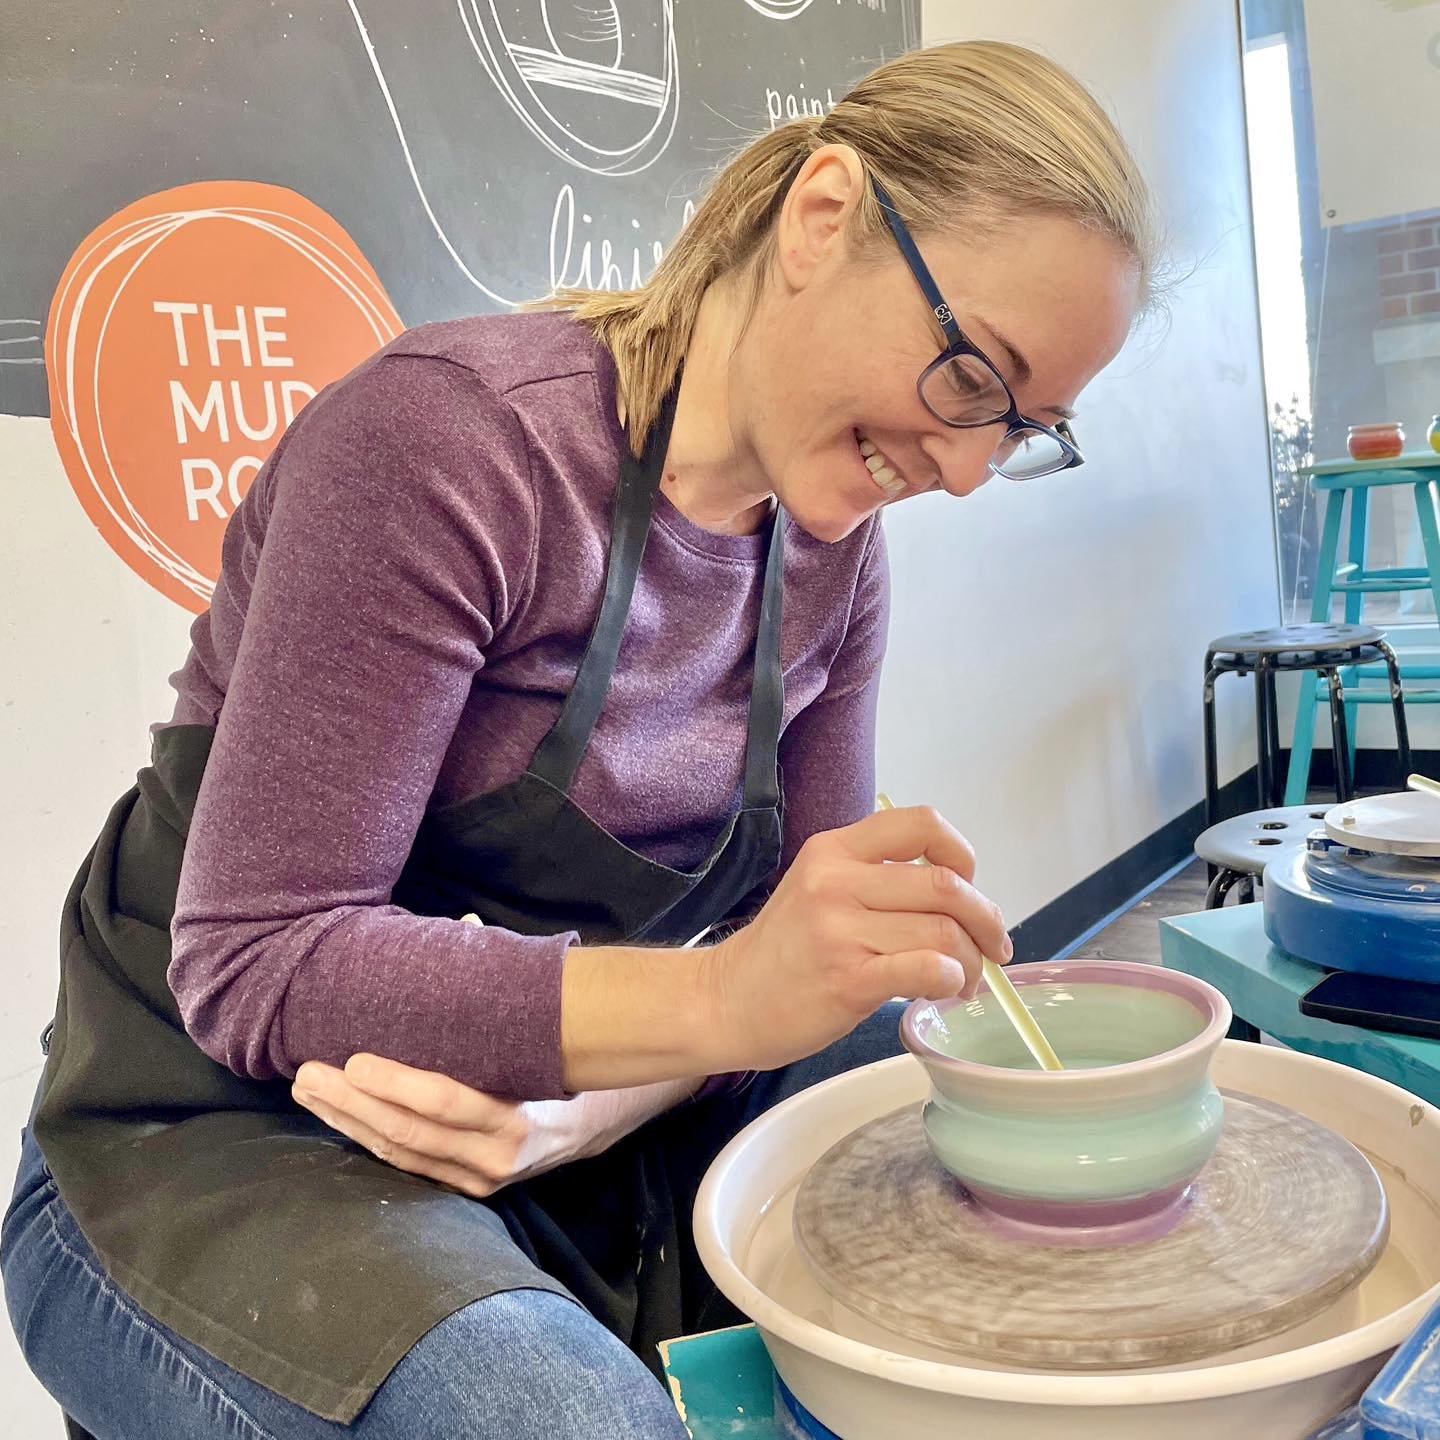 🎨 We have 3 spots left in our next Potter's Wheel Course for Beginners! 

Sign up ages 16+ at the link in our bio
.
.
.
#themudroomgr #potteryclass #LearnPottery #giftsforher #girlsdayout #makeart #ceramics #grkids #grandrapidsmi #potterystudio